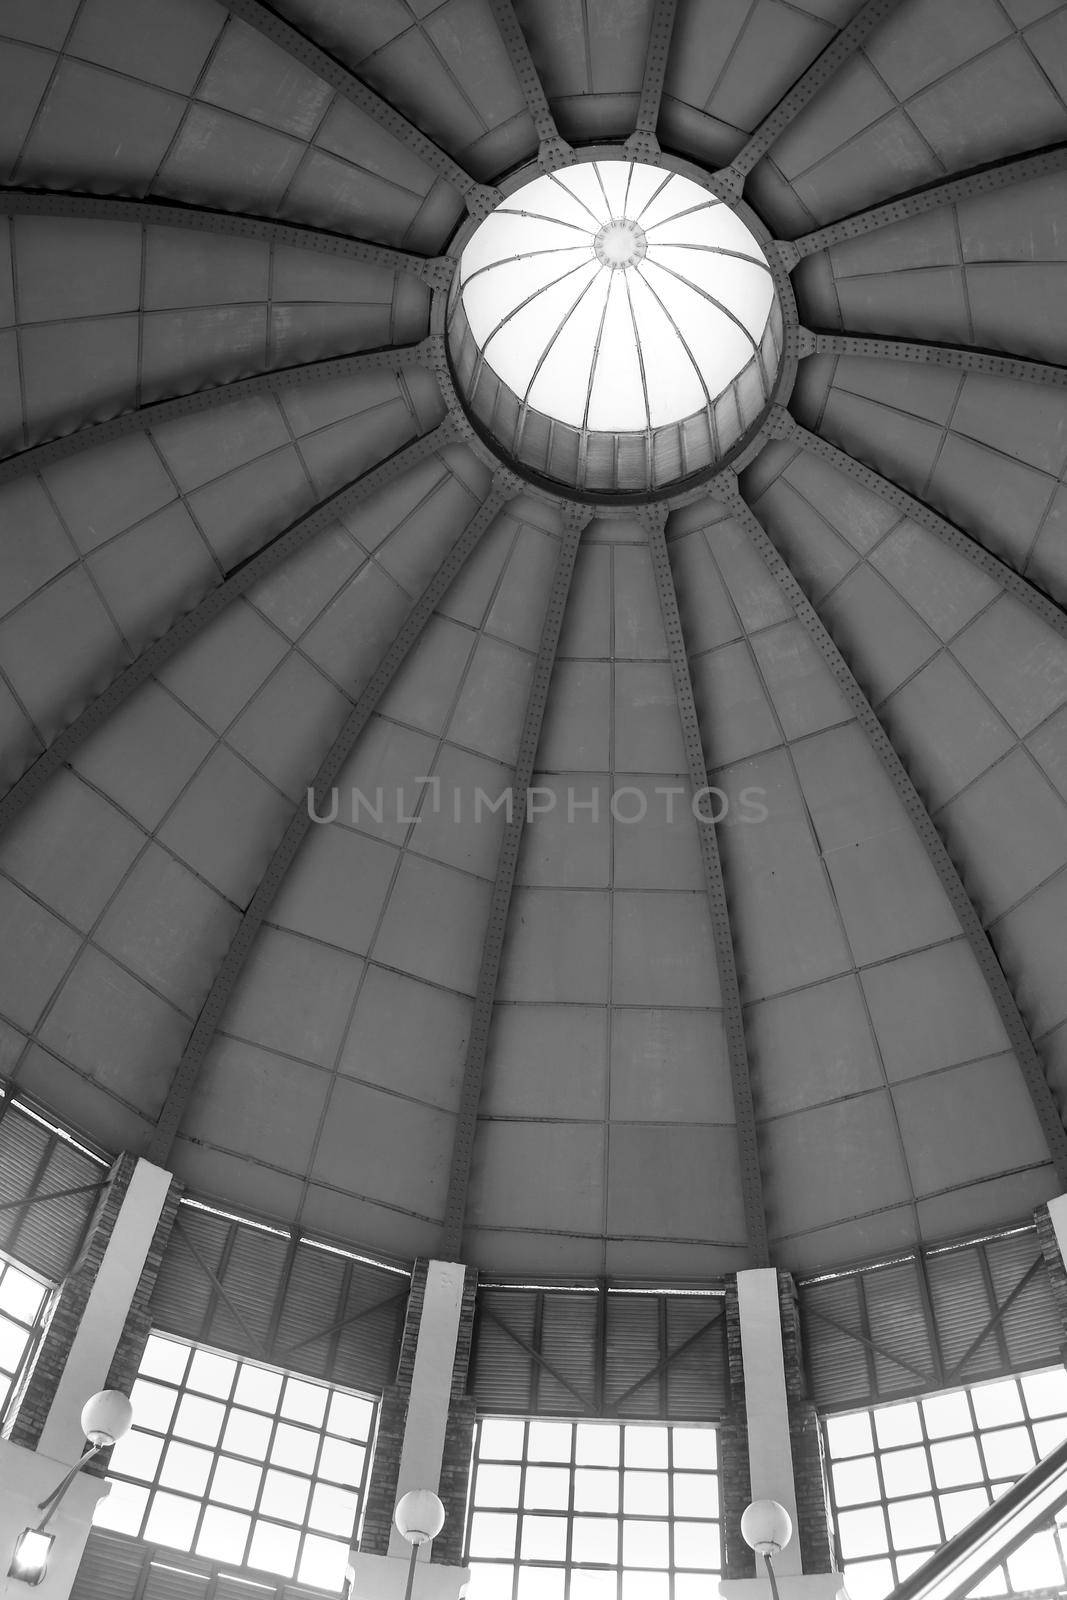 Dome of the Central Market of Alicante by soniabonet